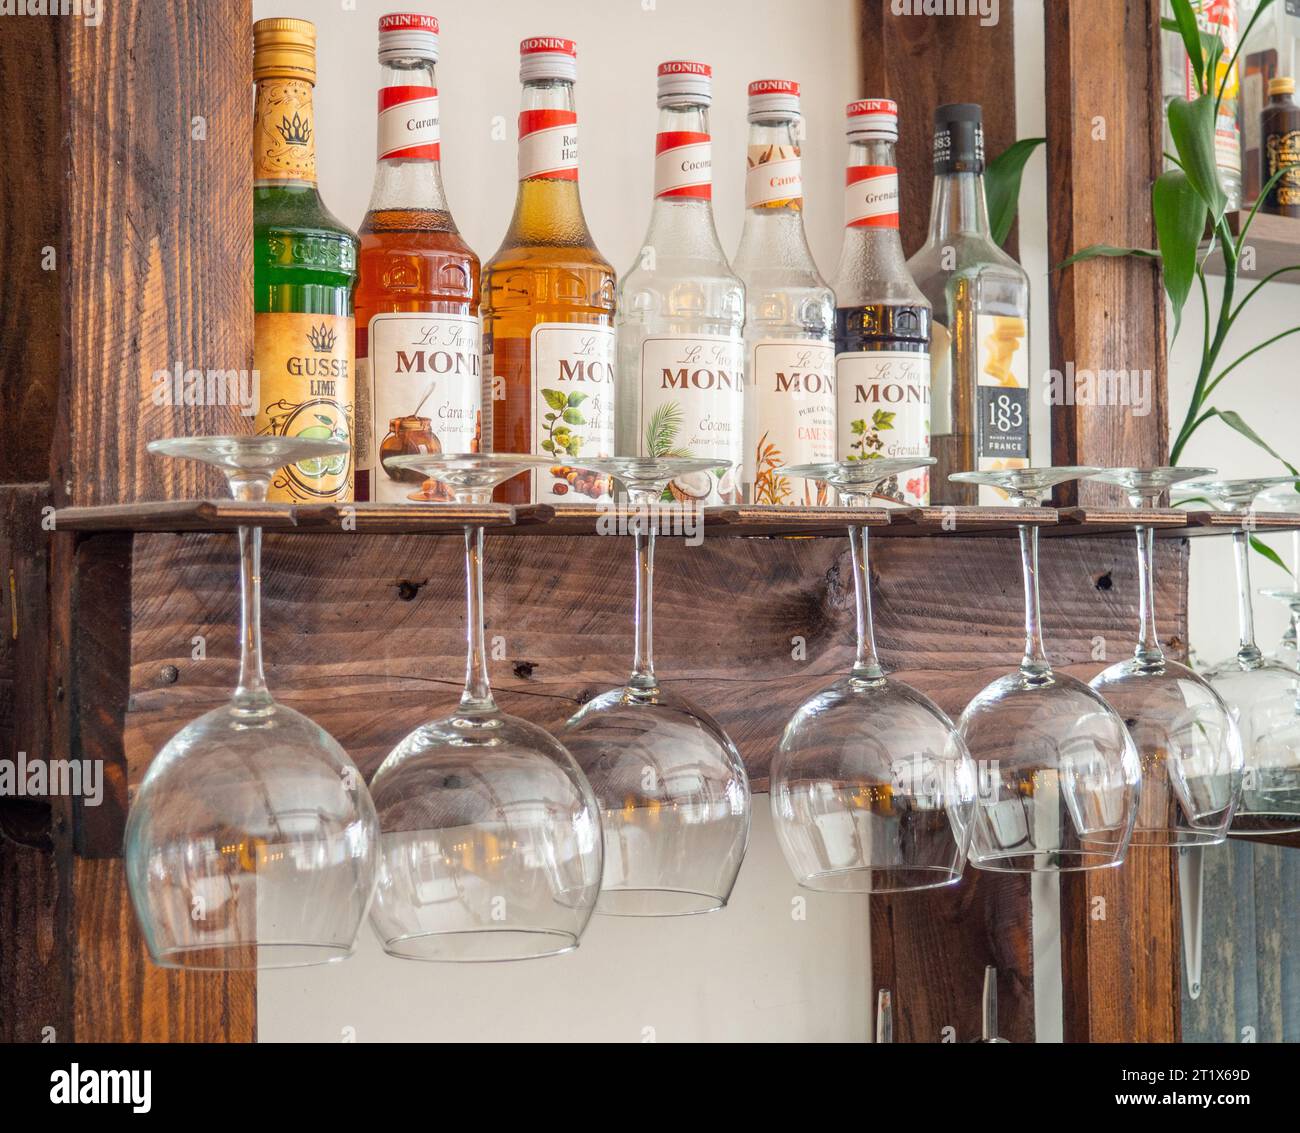 https://c8.alamy.com/comp/2T1X69D/batumi-georgia-10142023-glasses-hang-over-the-bar-counter-the-glasses-are-turned-upside-down-restaurant-interior-concept-of-drinking-alcoholic-2T1X69D.jpg